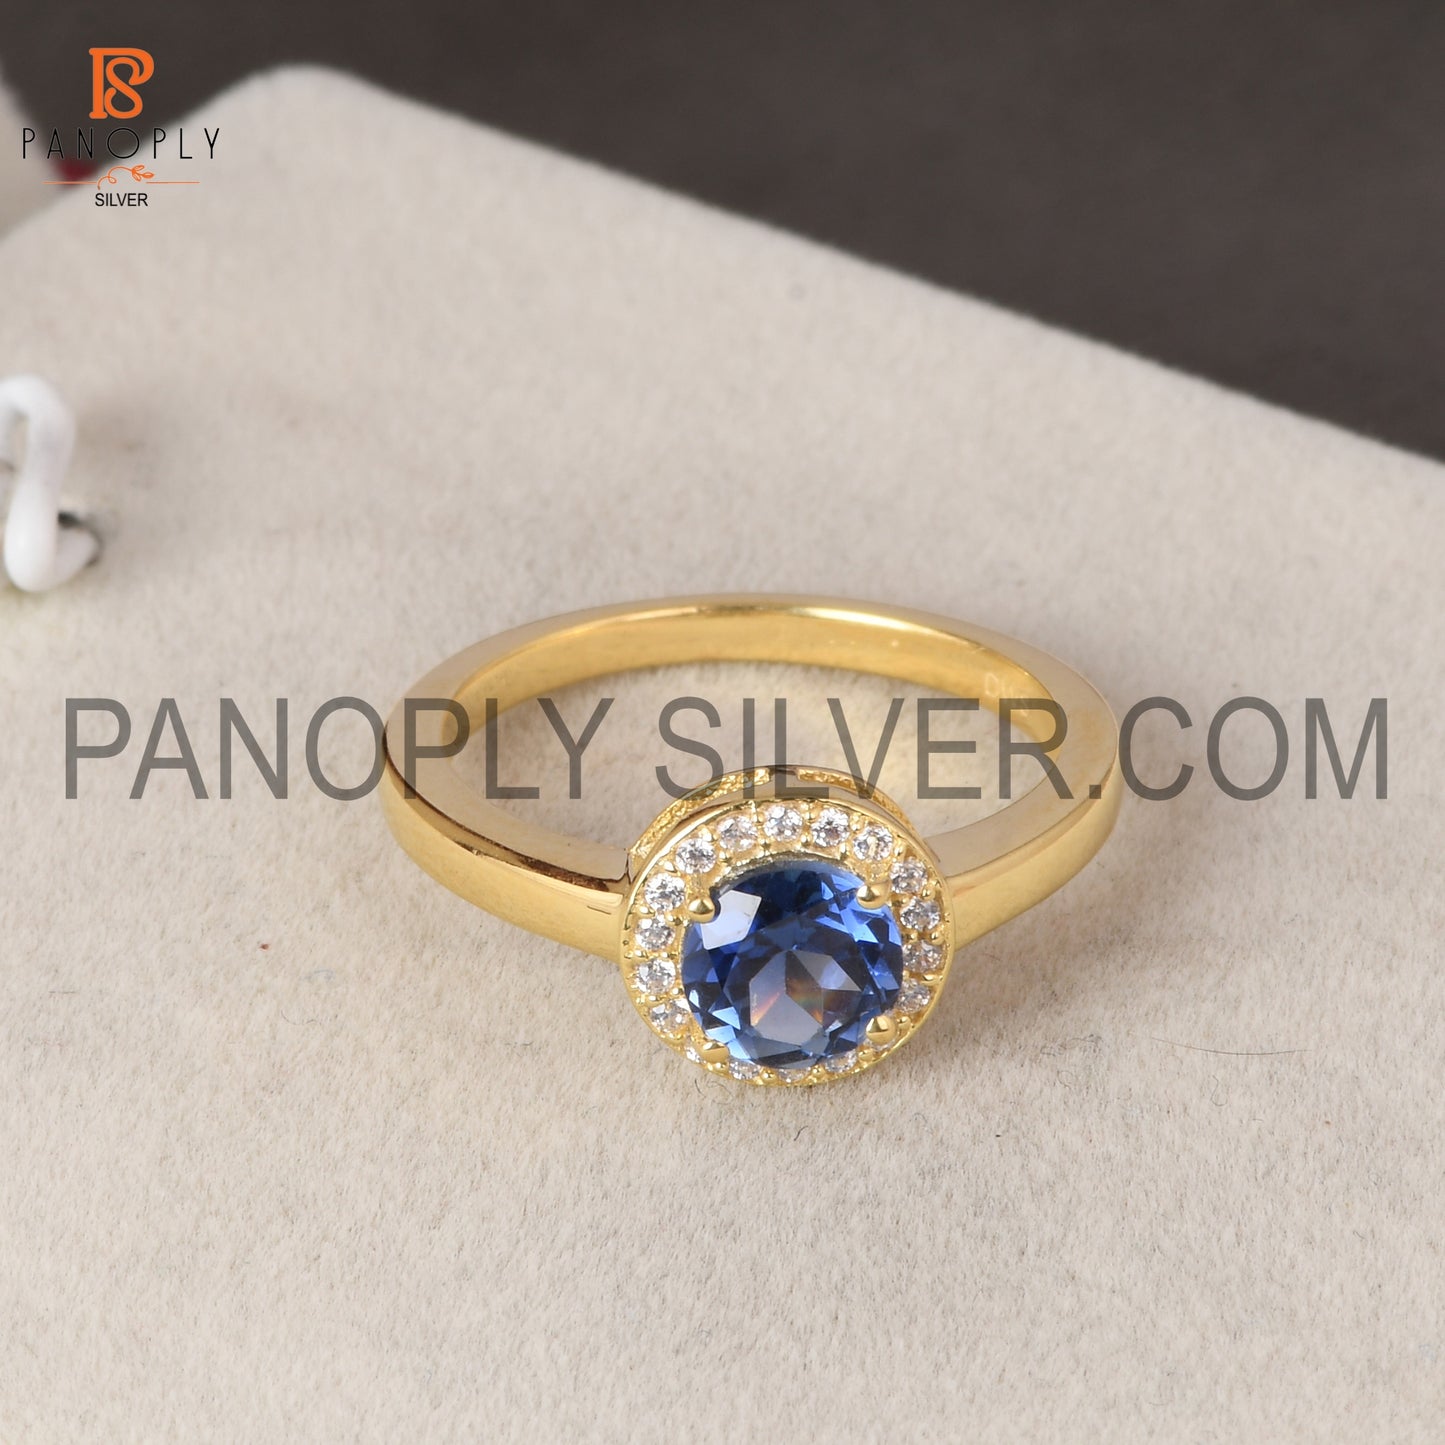 925 Silver 0.5 micron Gold Plated Sapphire CZ Ring